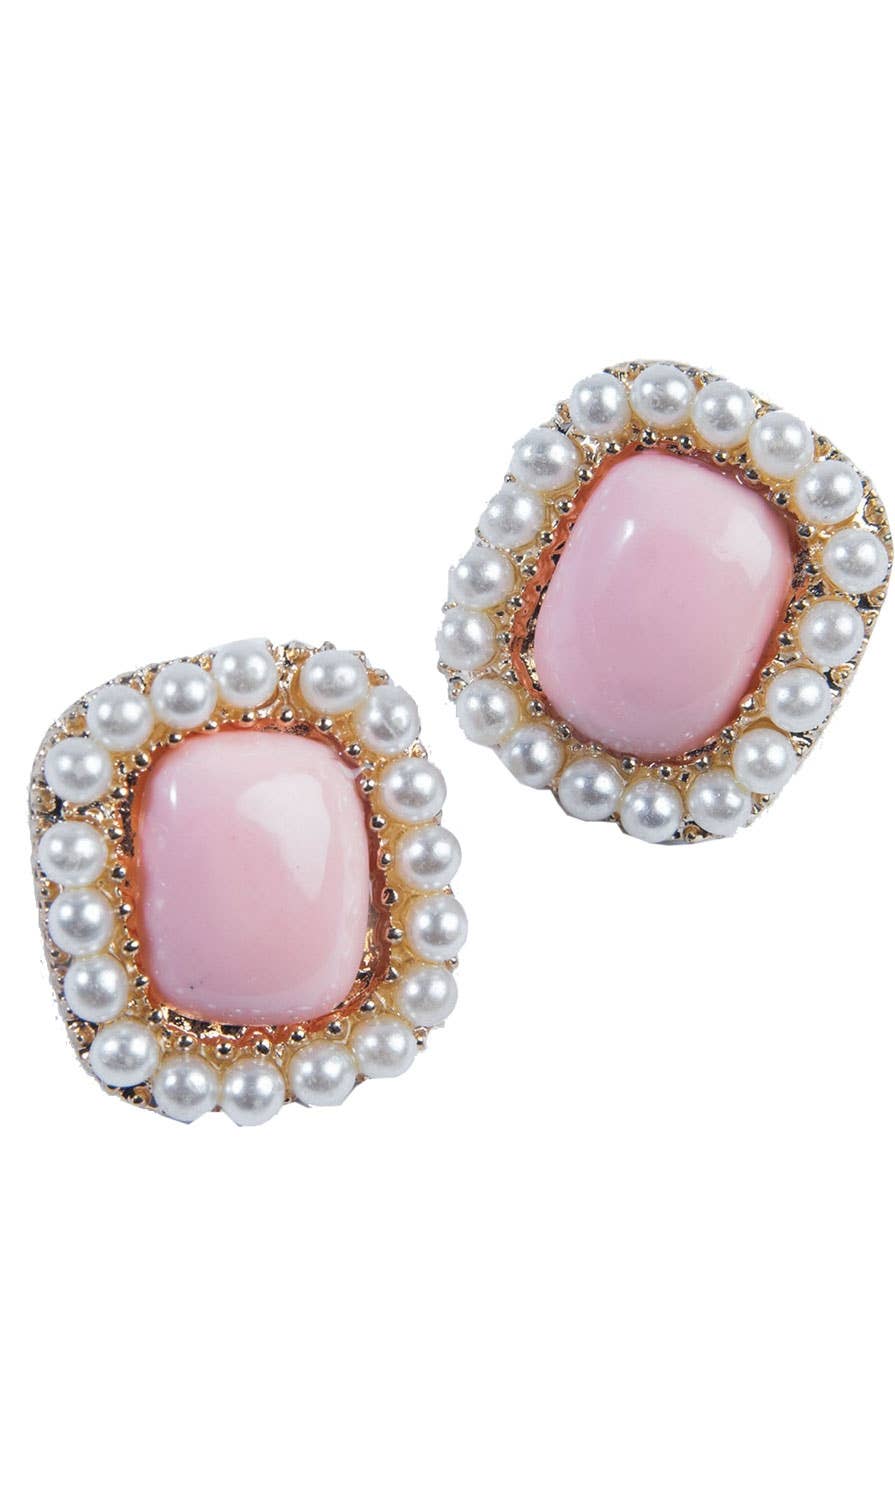 Vintage Pearl And Pink Earrings Costume Accessory Main Image